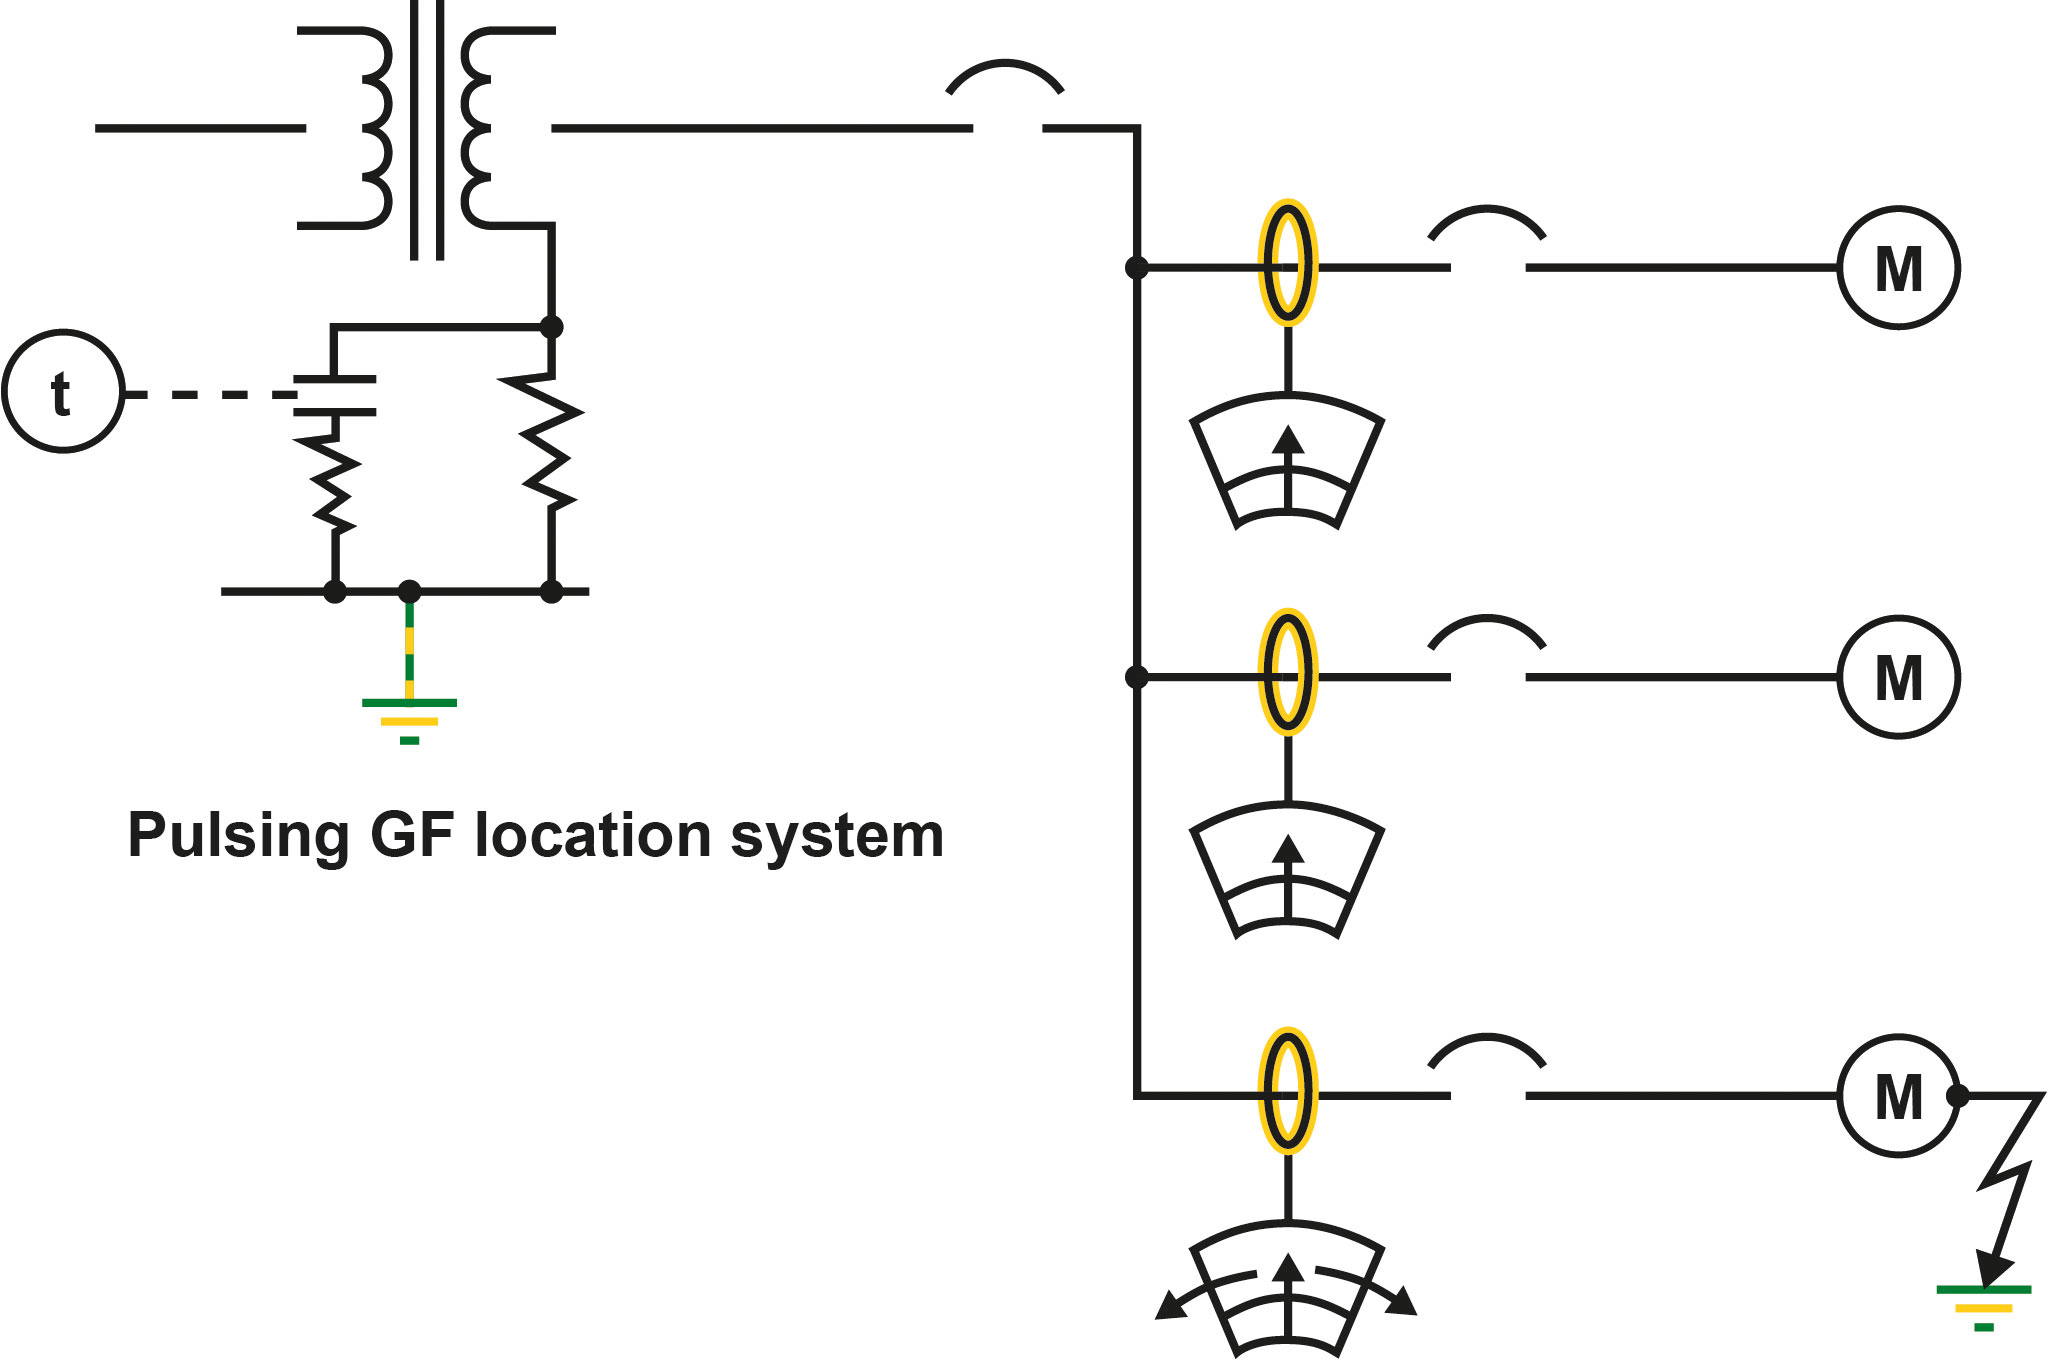 [Translate to english:] Pulsing ground-fault location system